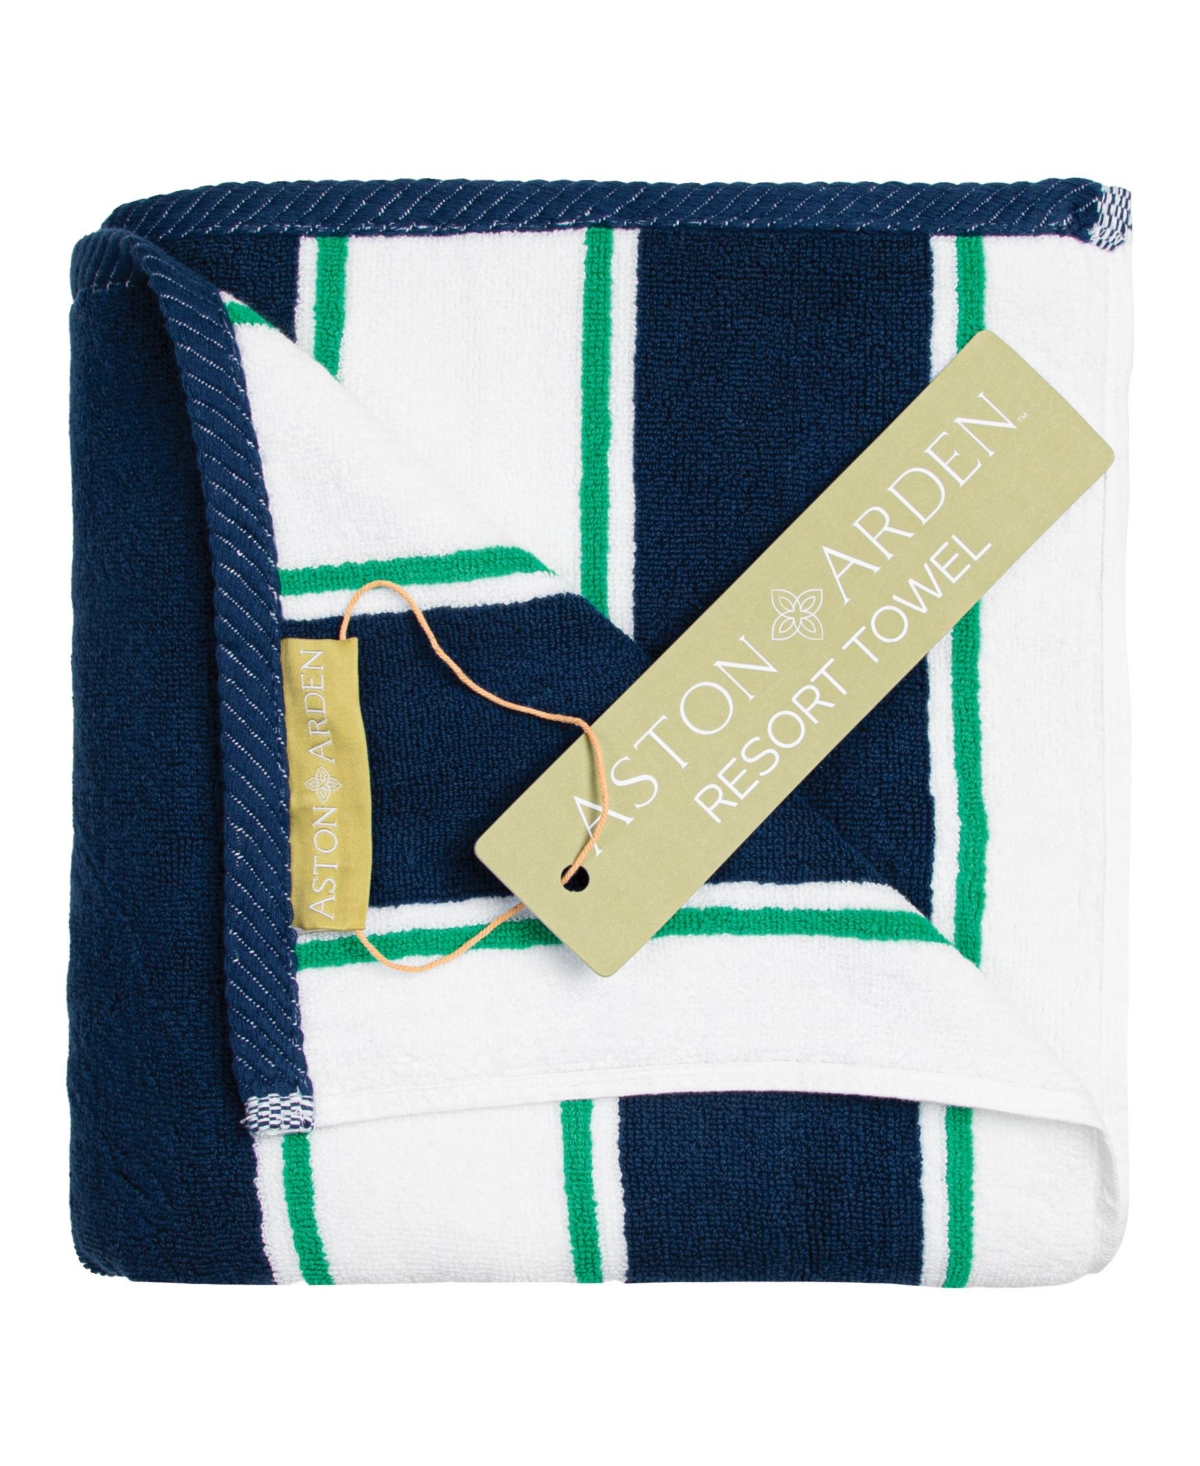 Aston And Arden Oversized Extra Thick Luxury Beach Towel (35x70 In., 600 Gsm), Pinstriped, Soft Ring Spun Cotton Res In Navy/green